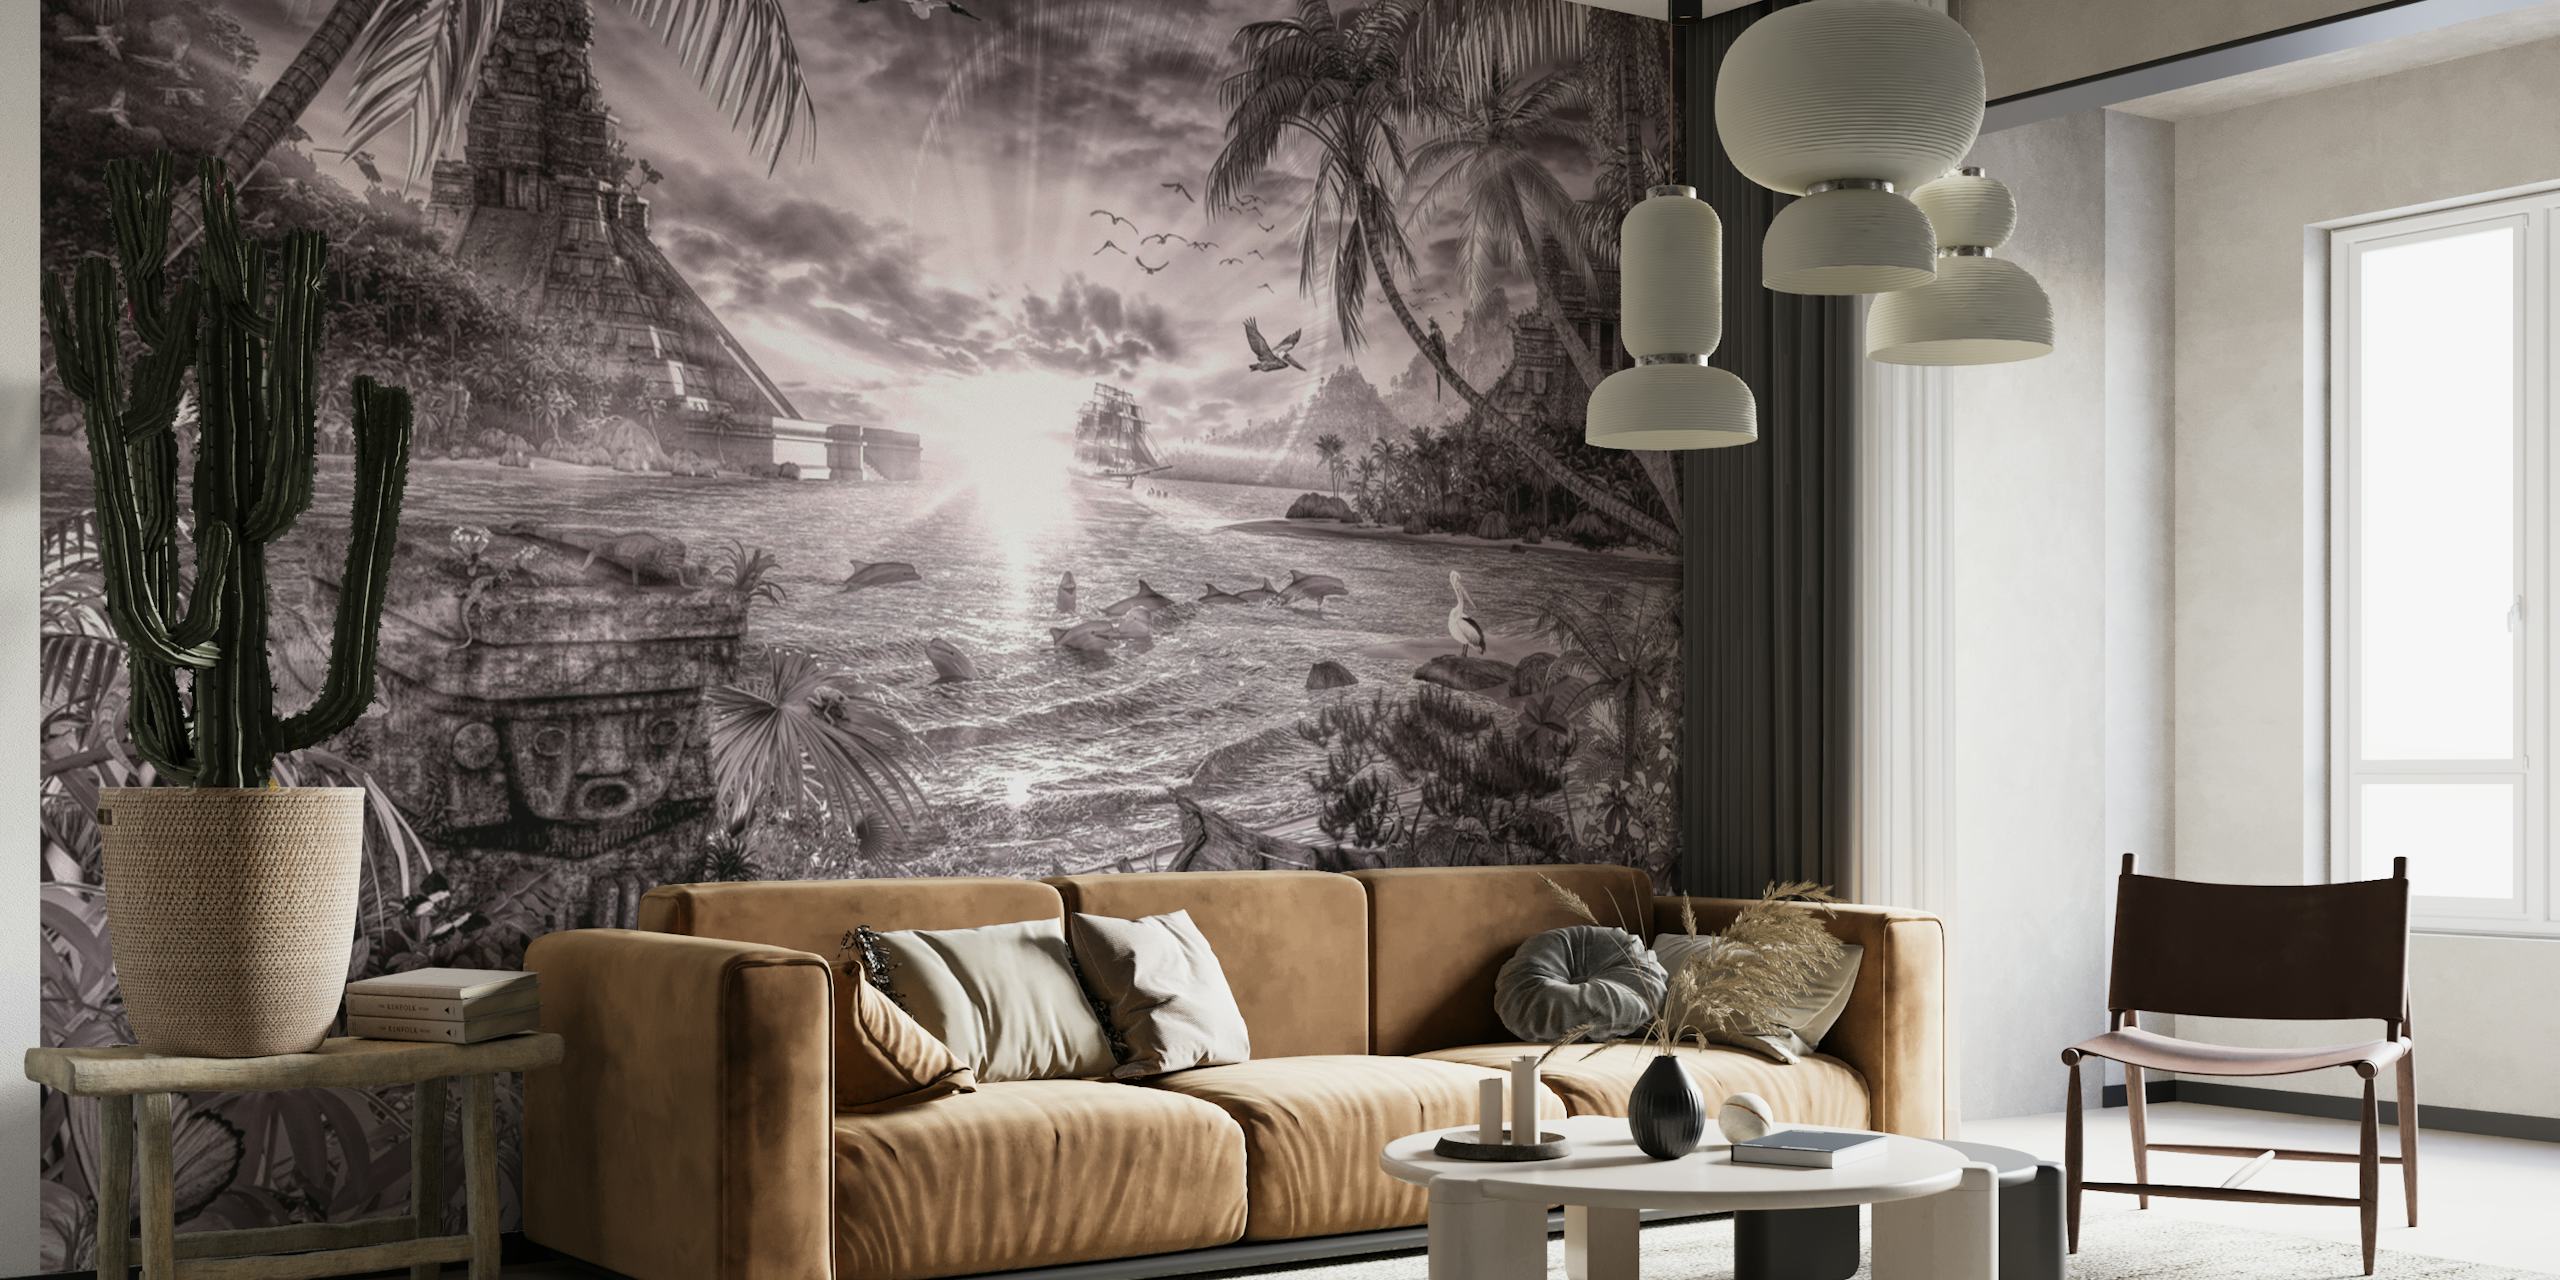 Black and white mural of a mystical palm-fringed bay with sun rays piercing through the foliage.